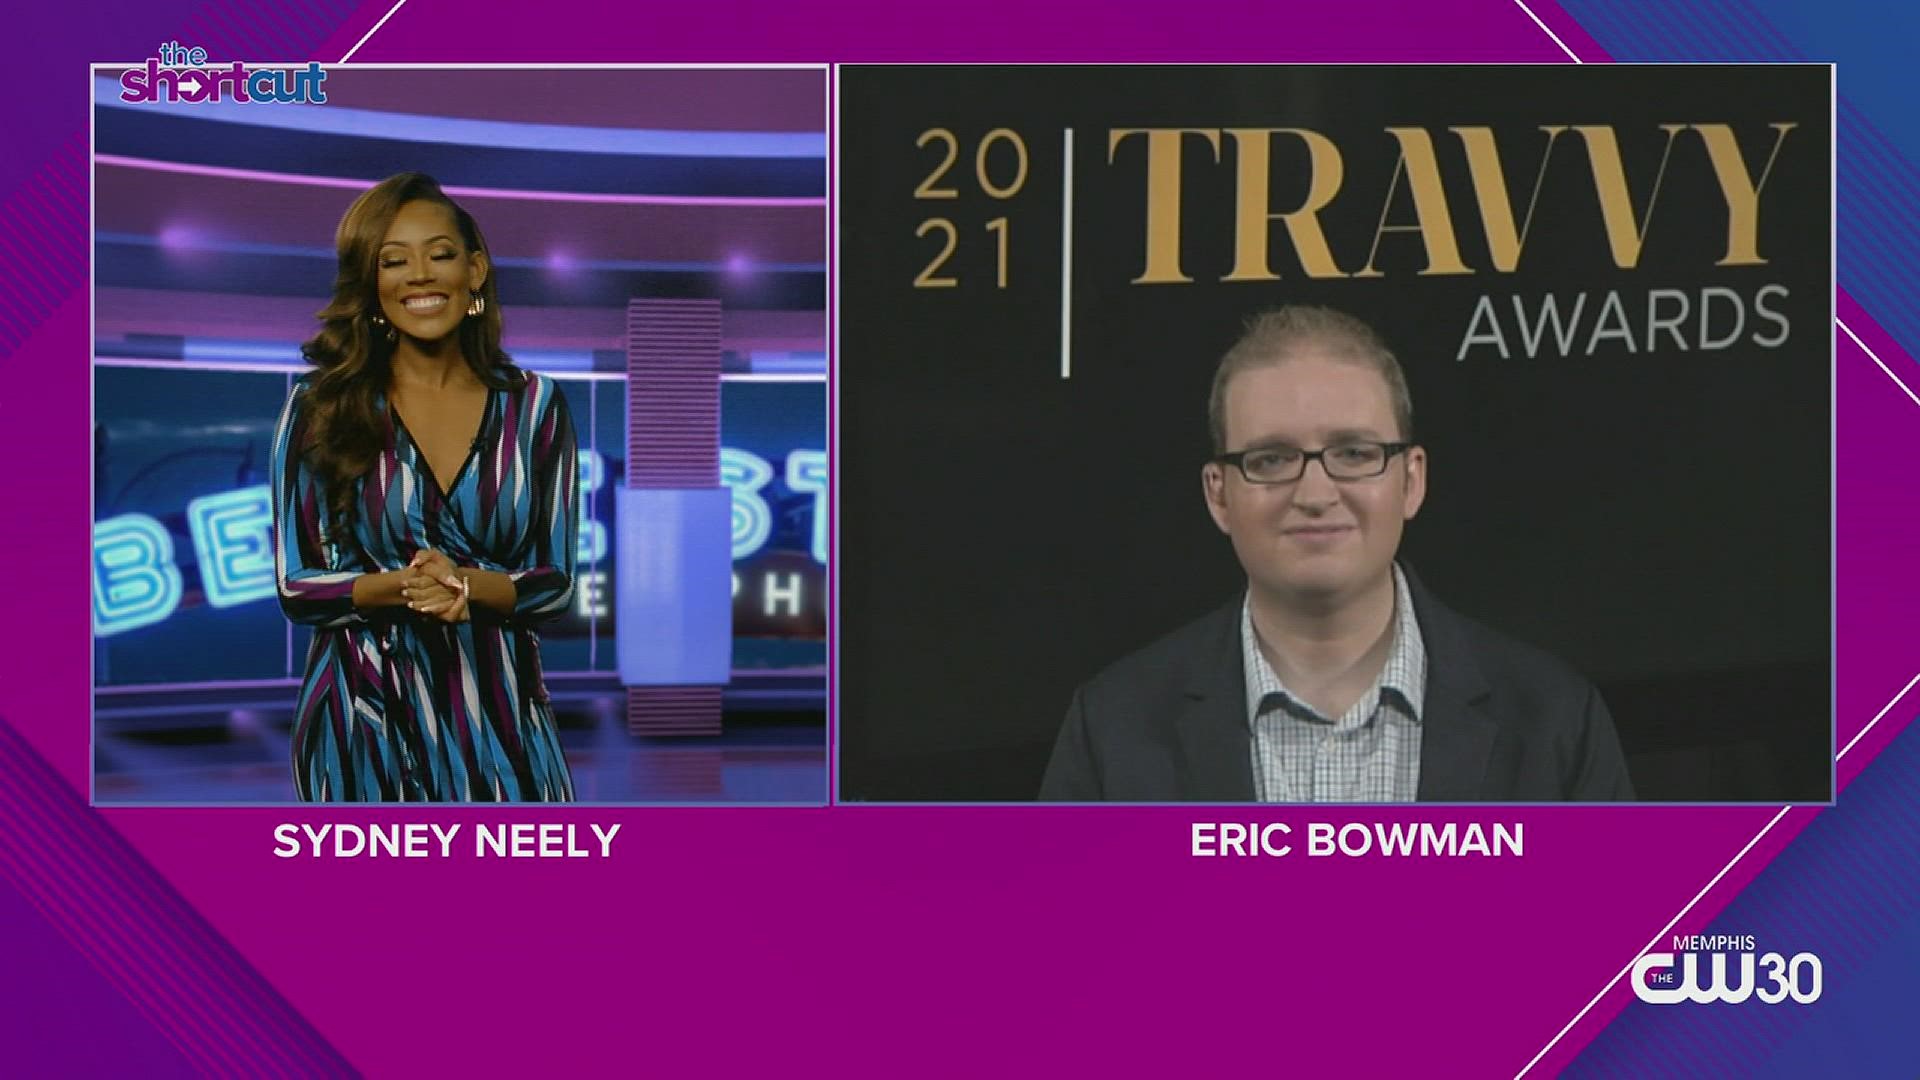 Looking to plan the best vacation of your life? Find out the winners of the 2021 Travvy Awards with travel expert Eric Bowman and lifestyle host Sydney Neely!